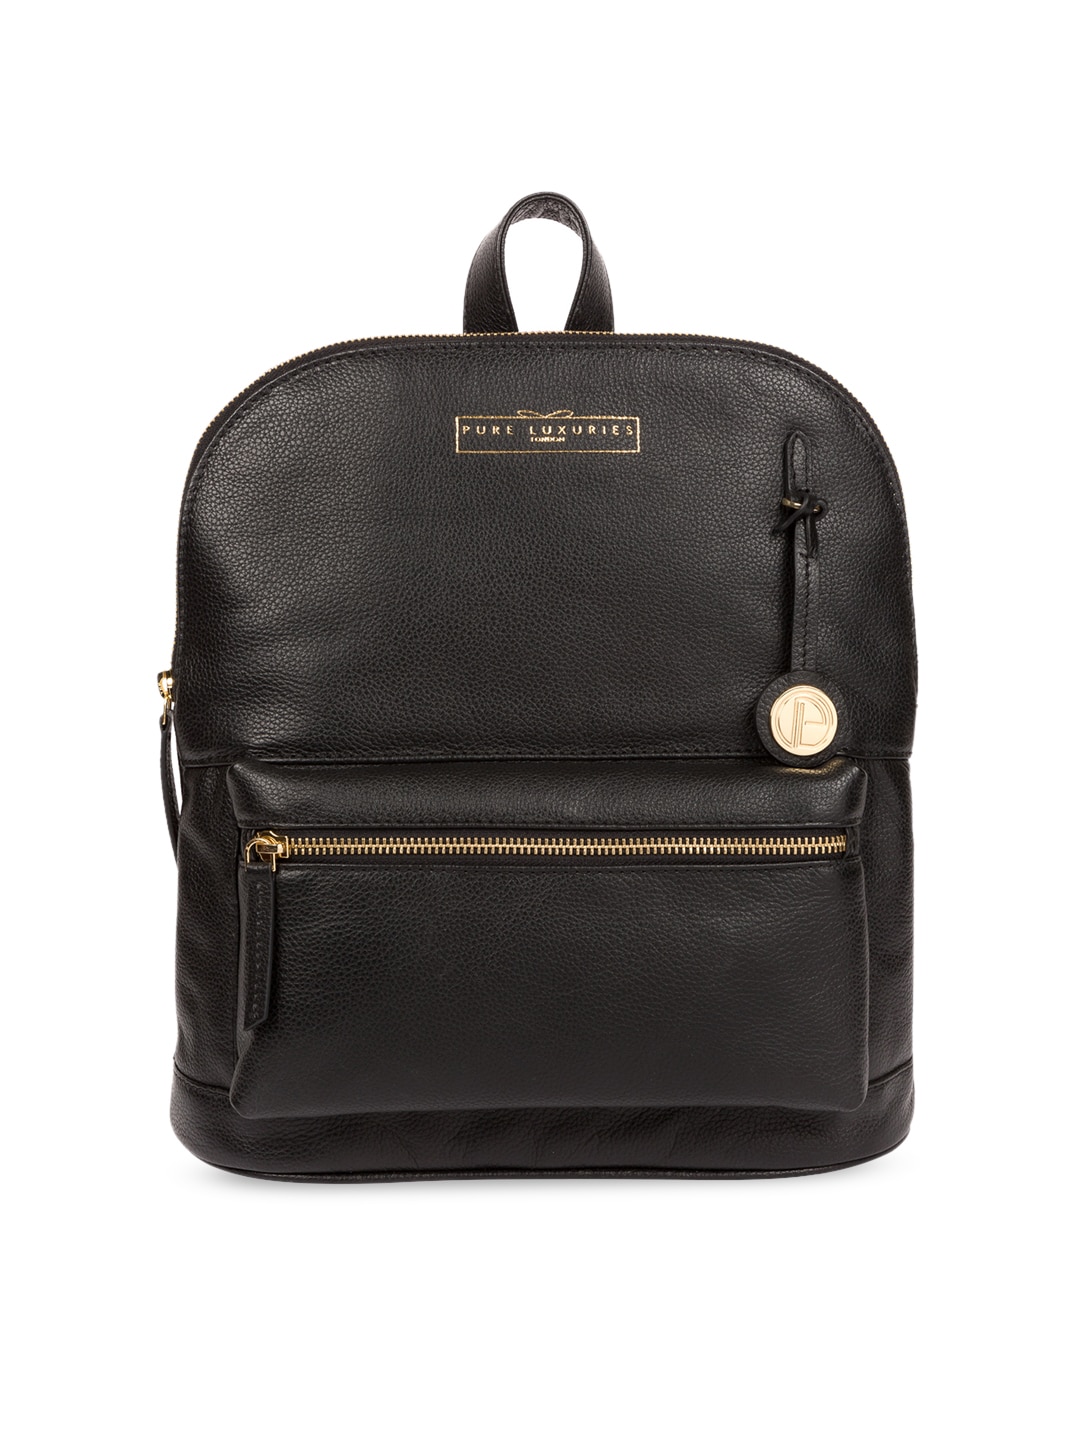 PURE LUXURIES LONDON Women Black Solid Genuine Leather Kinsley Backpack Price in India